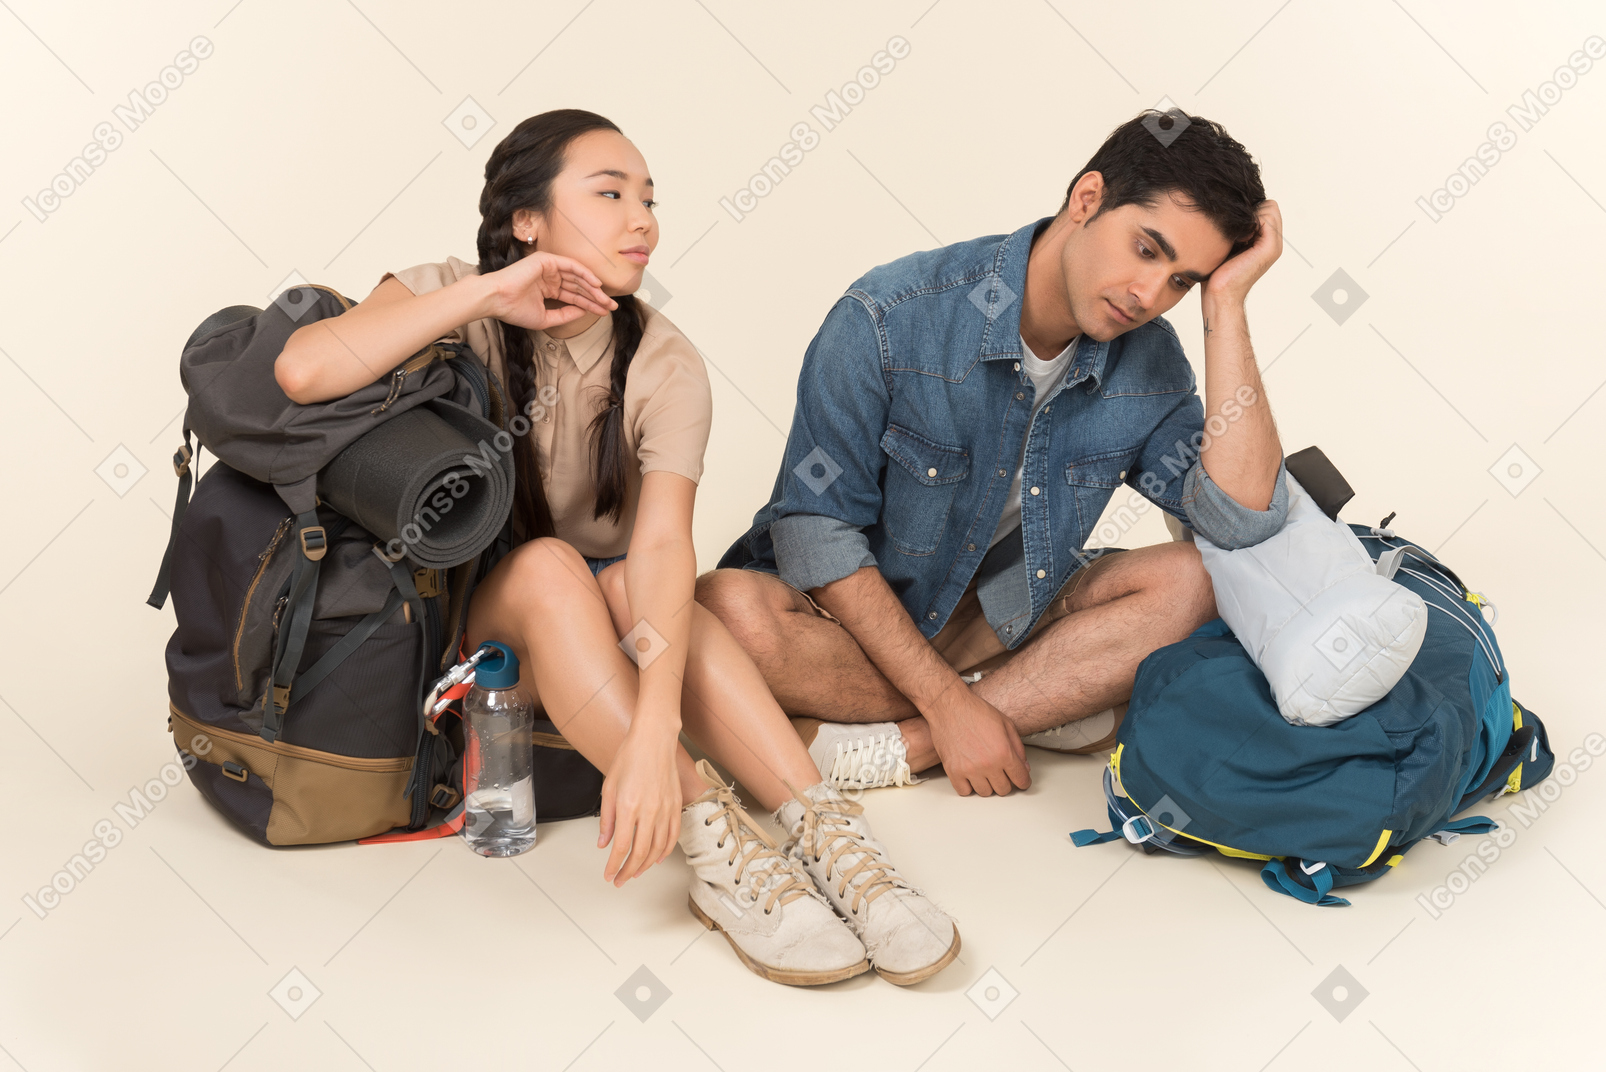 Young interracial couple sitting near huge backpacks